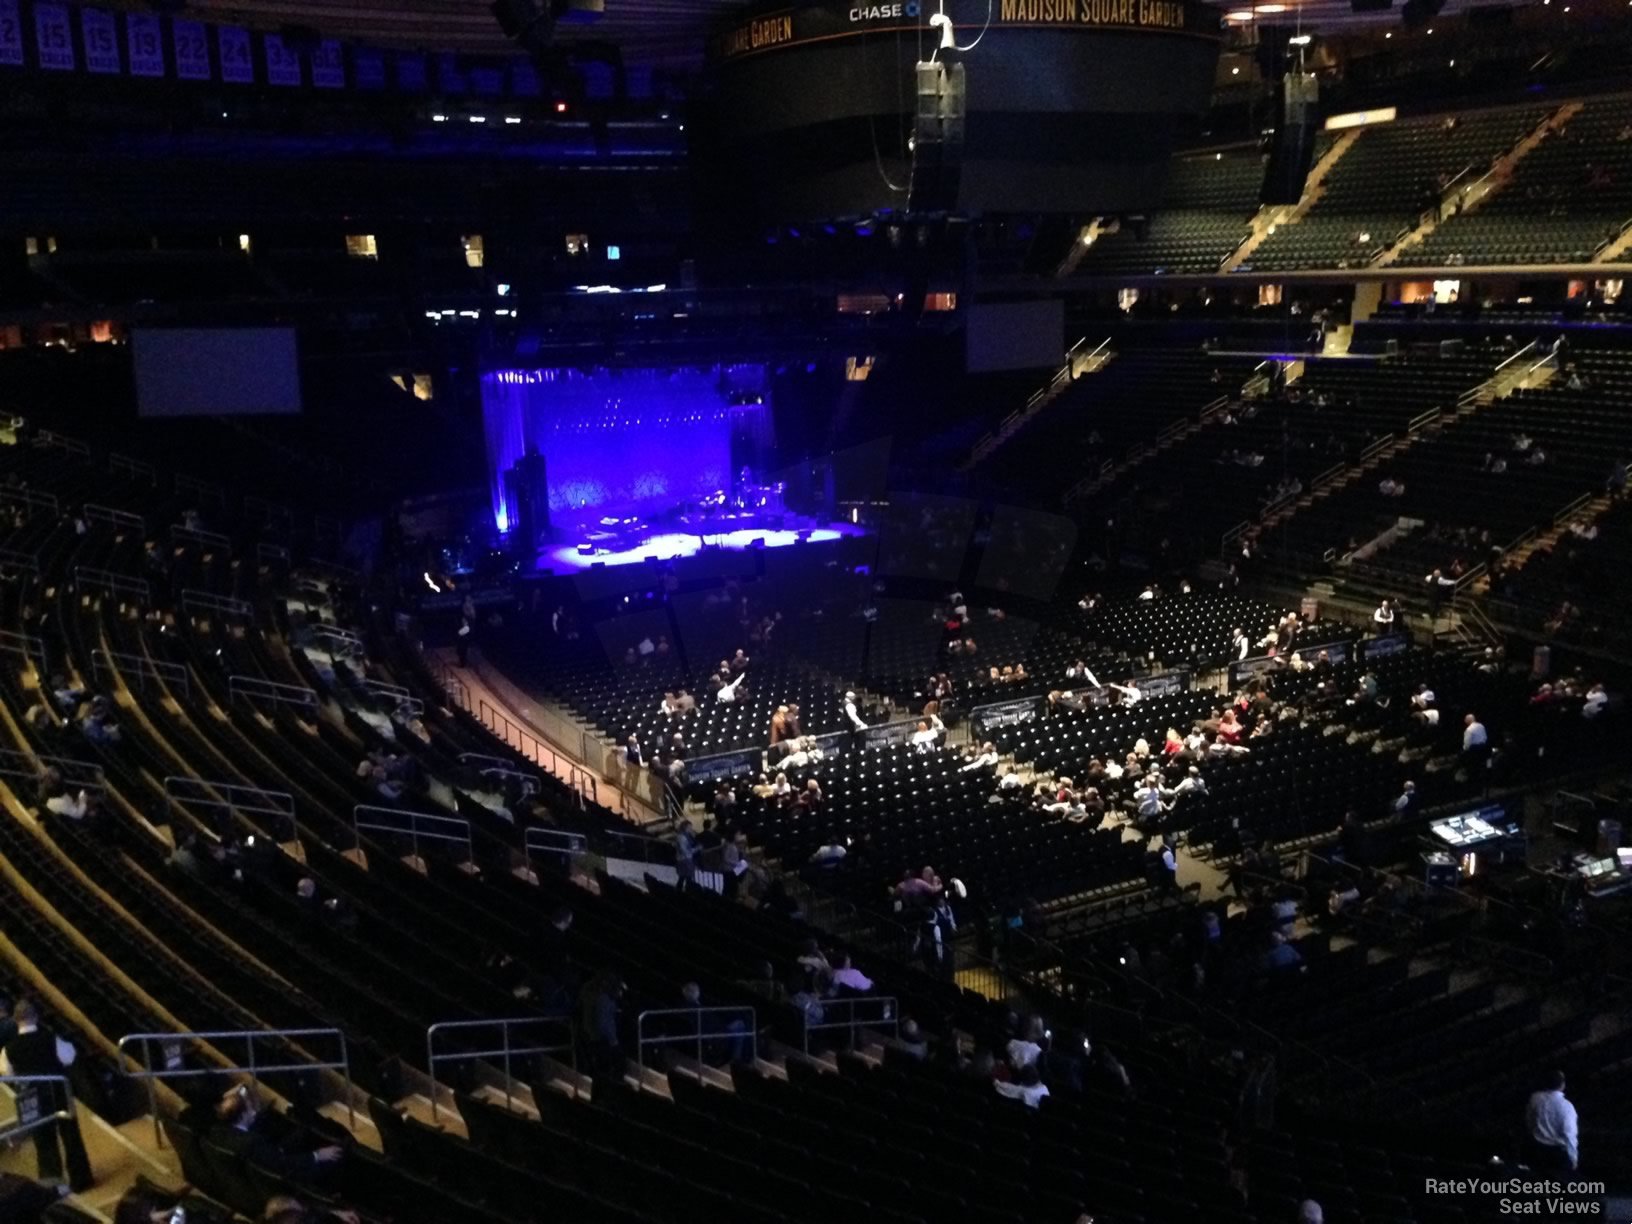 section 201, row 2 seat view  for concert - madison square garden